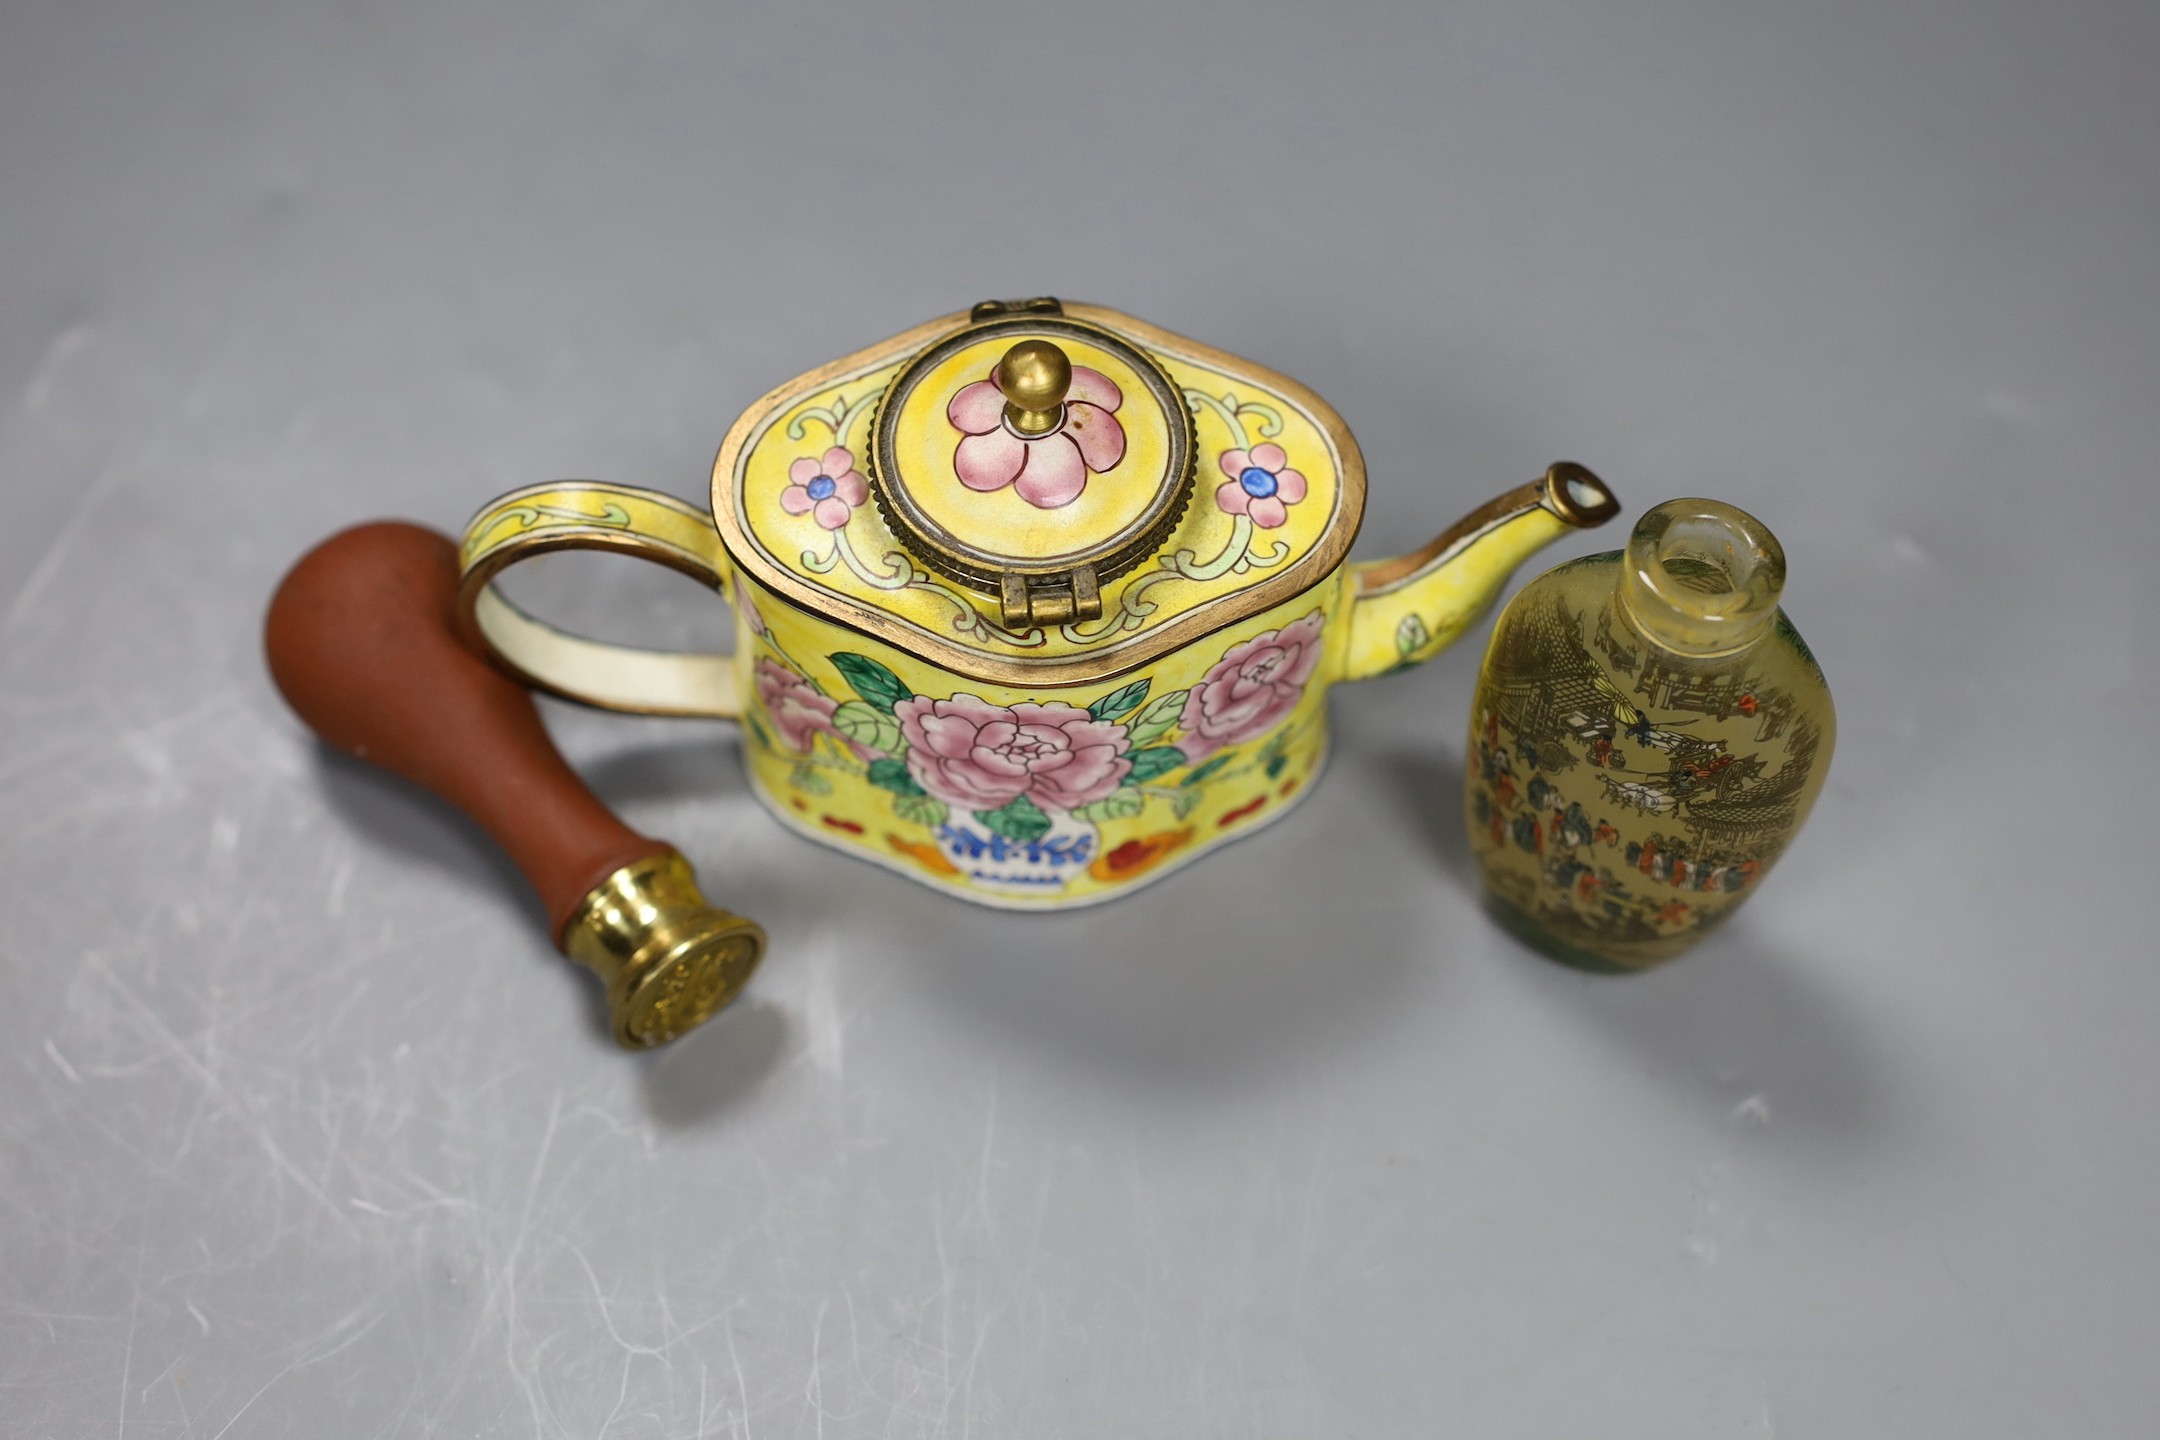 A Canton enamel miniature teapot and a snuff bottle, together with a European stamp seal